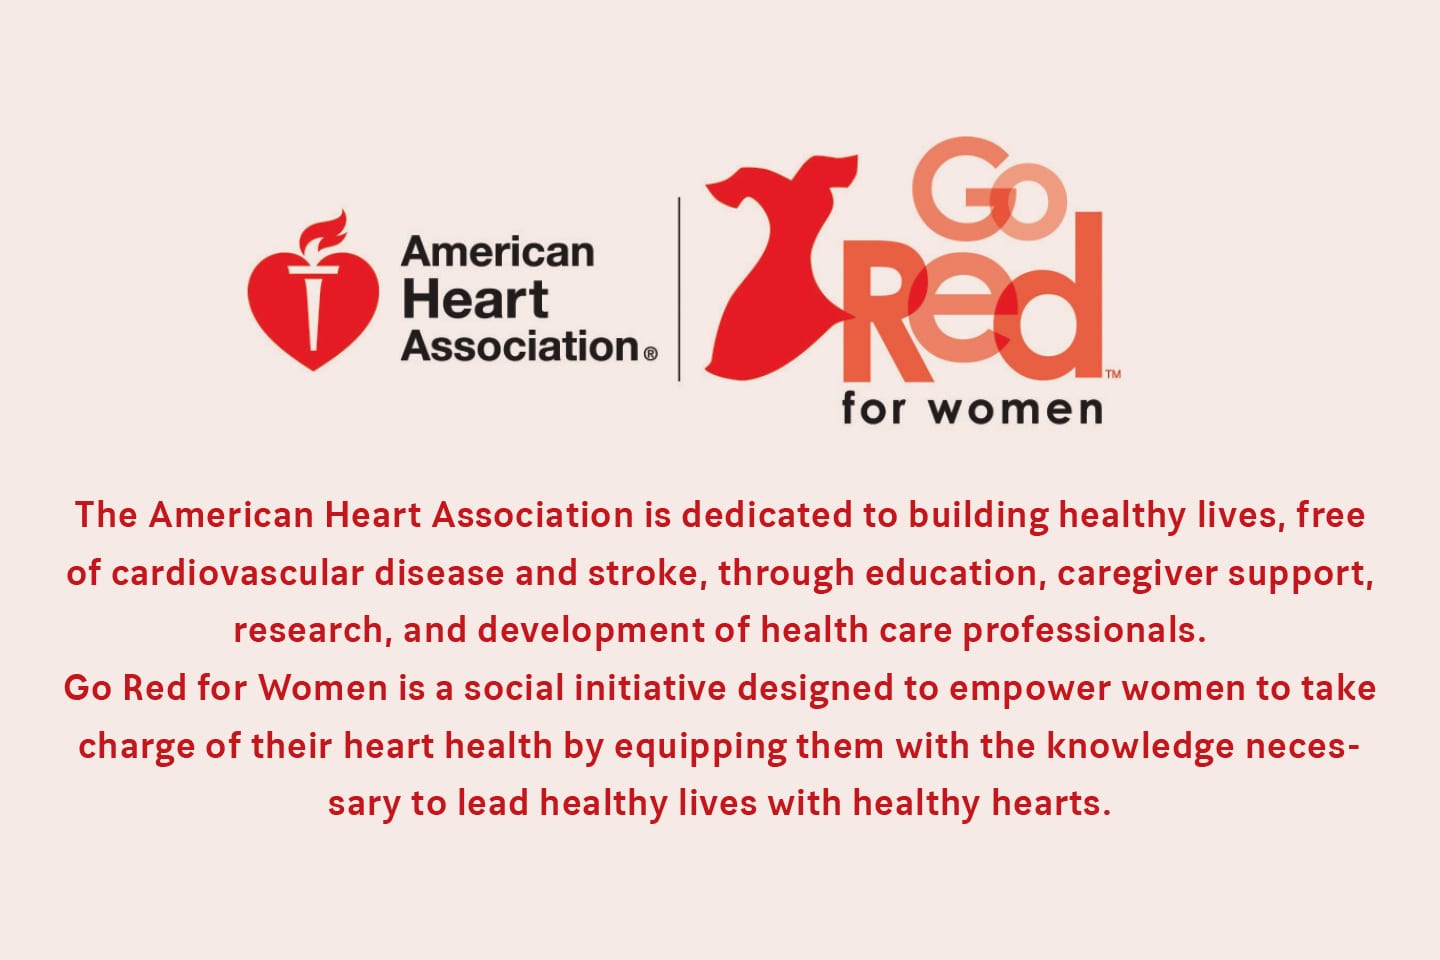 American Heart Association Go Red for Women in chattanooga